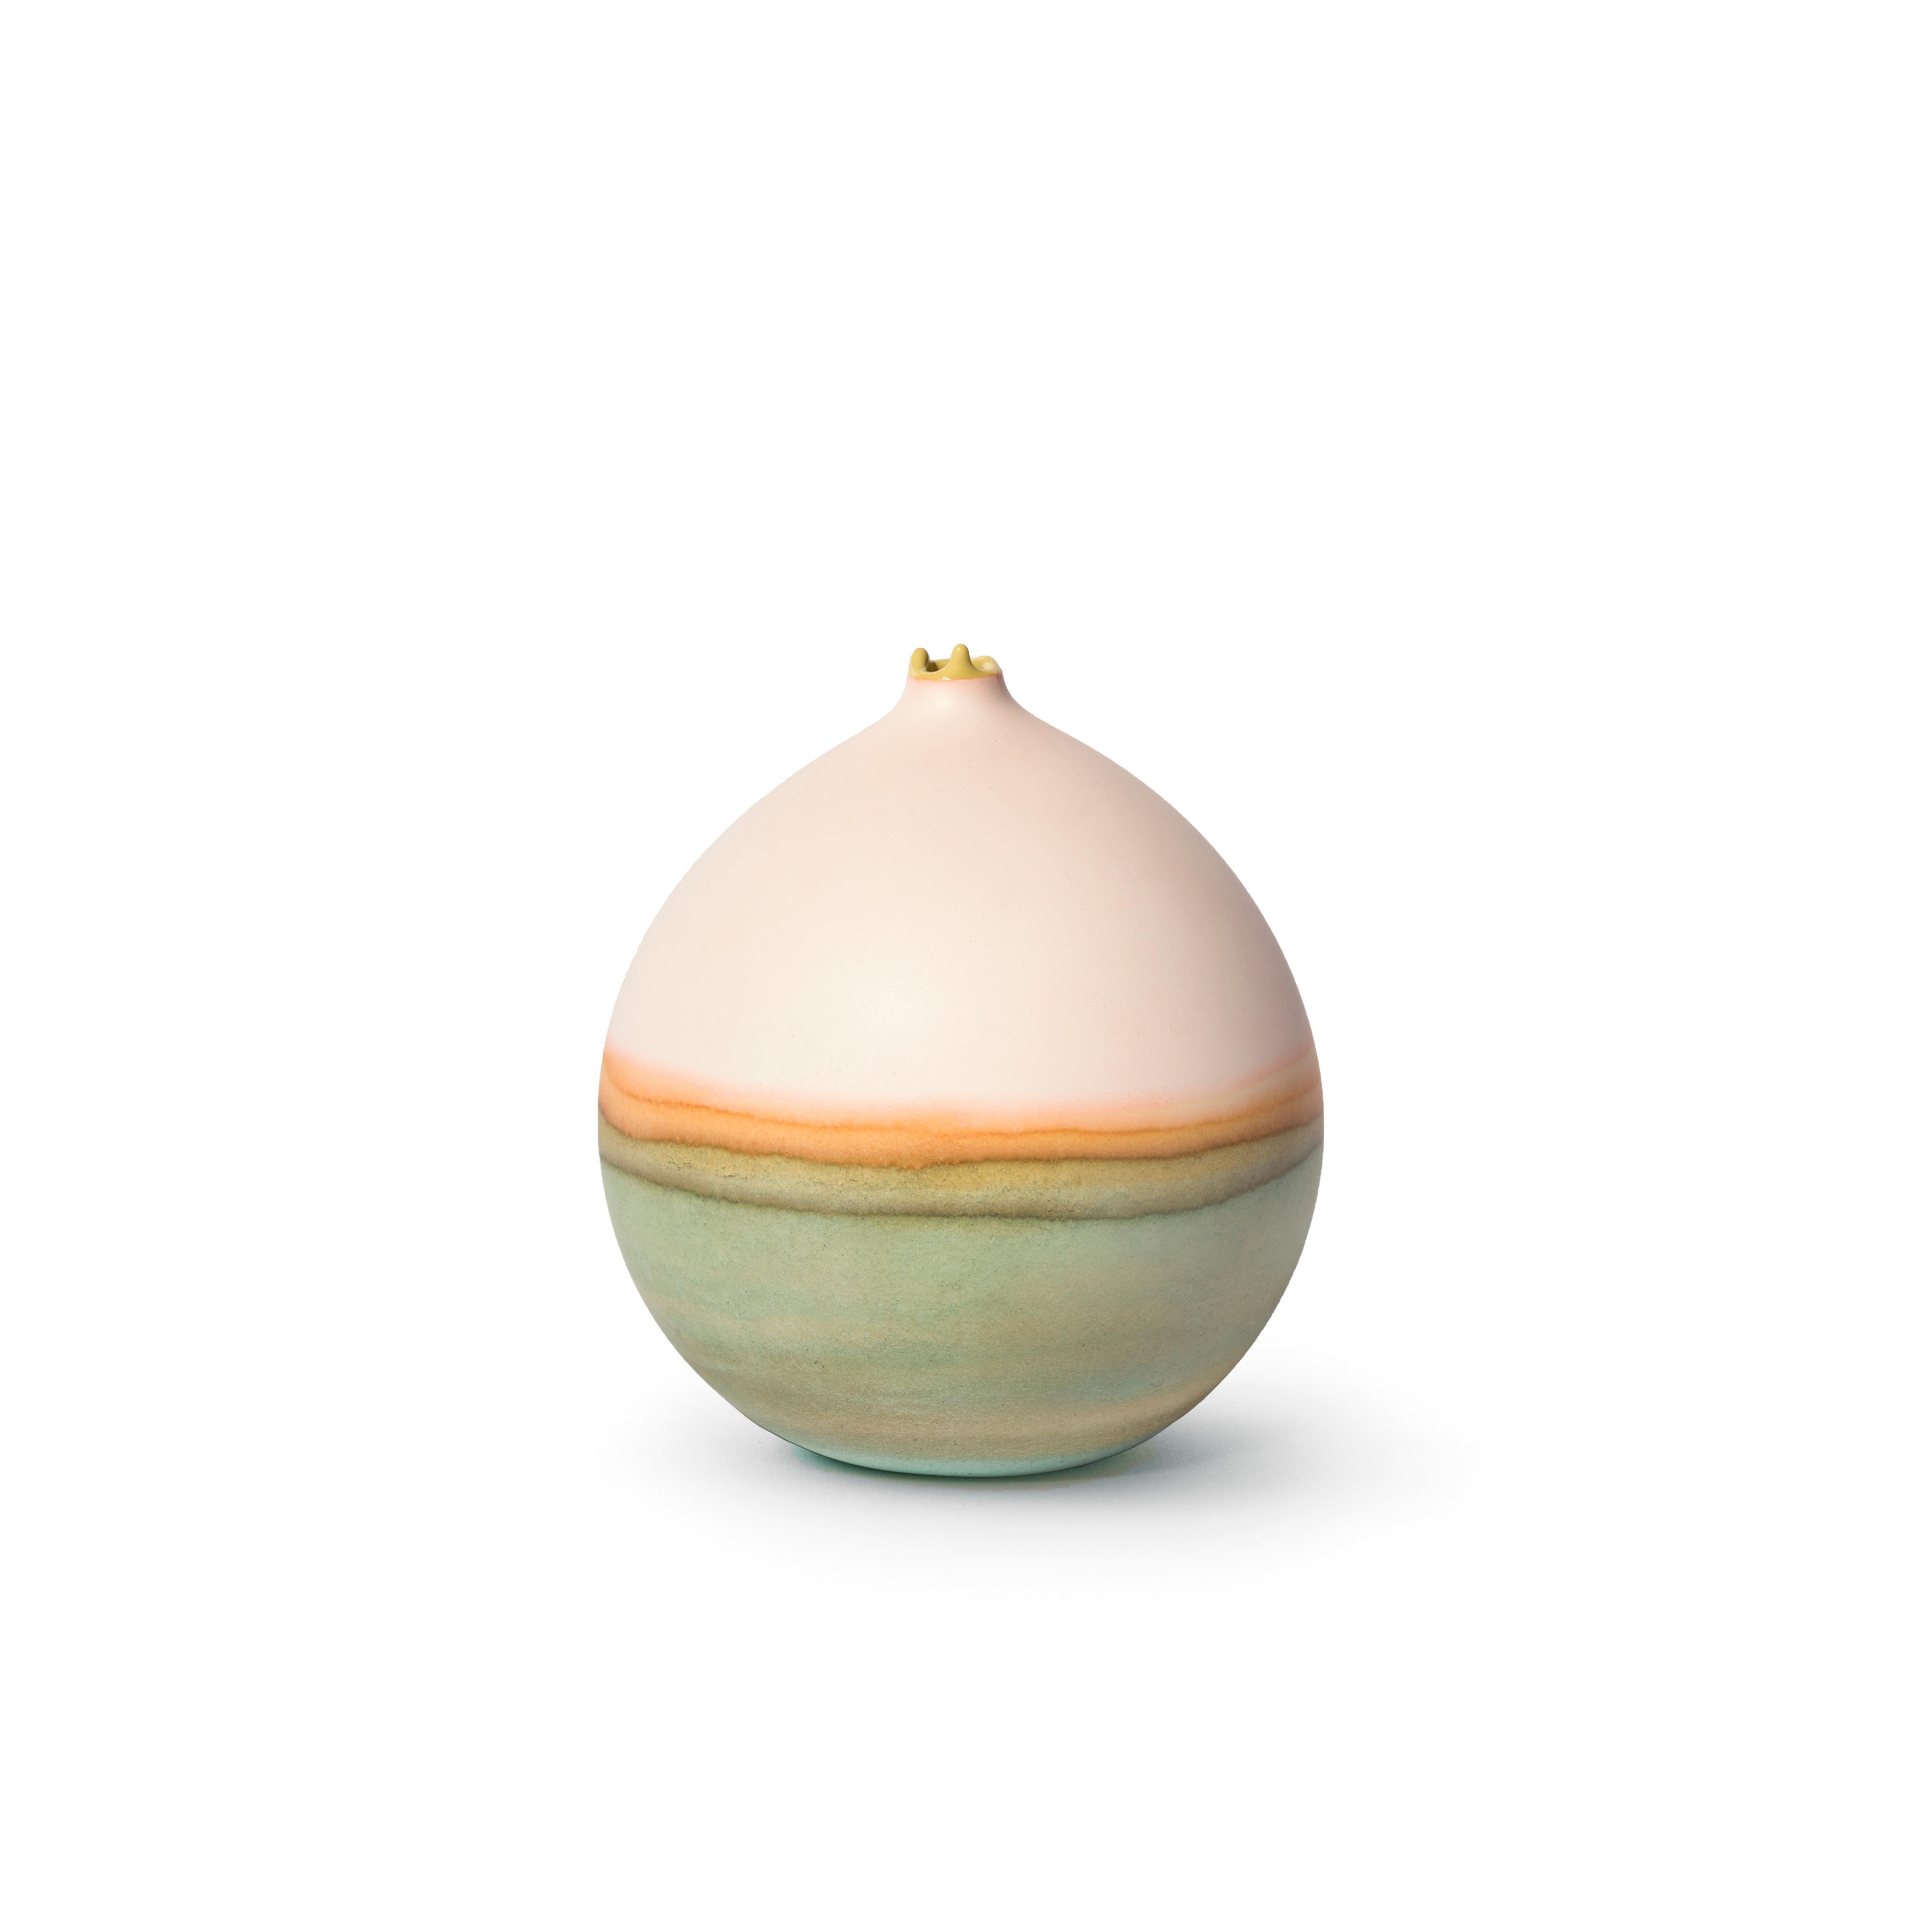 Peach patina pluto vase by Elyse Graham
Dimensions: W 13 x D 13 x H 14 cm
Materials: Plaster, Resin
MOLDED, DYED, AND FINISHED BY HAND IN LA. CUSTOMIZATION
AVAILABLE.
ALL PIECES ARE MADE TO ORDER

This collection of vessels is inspired by